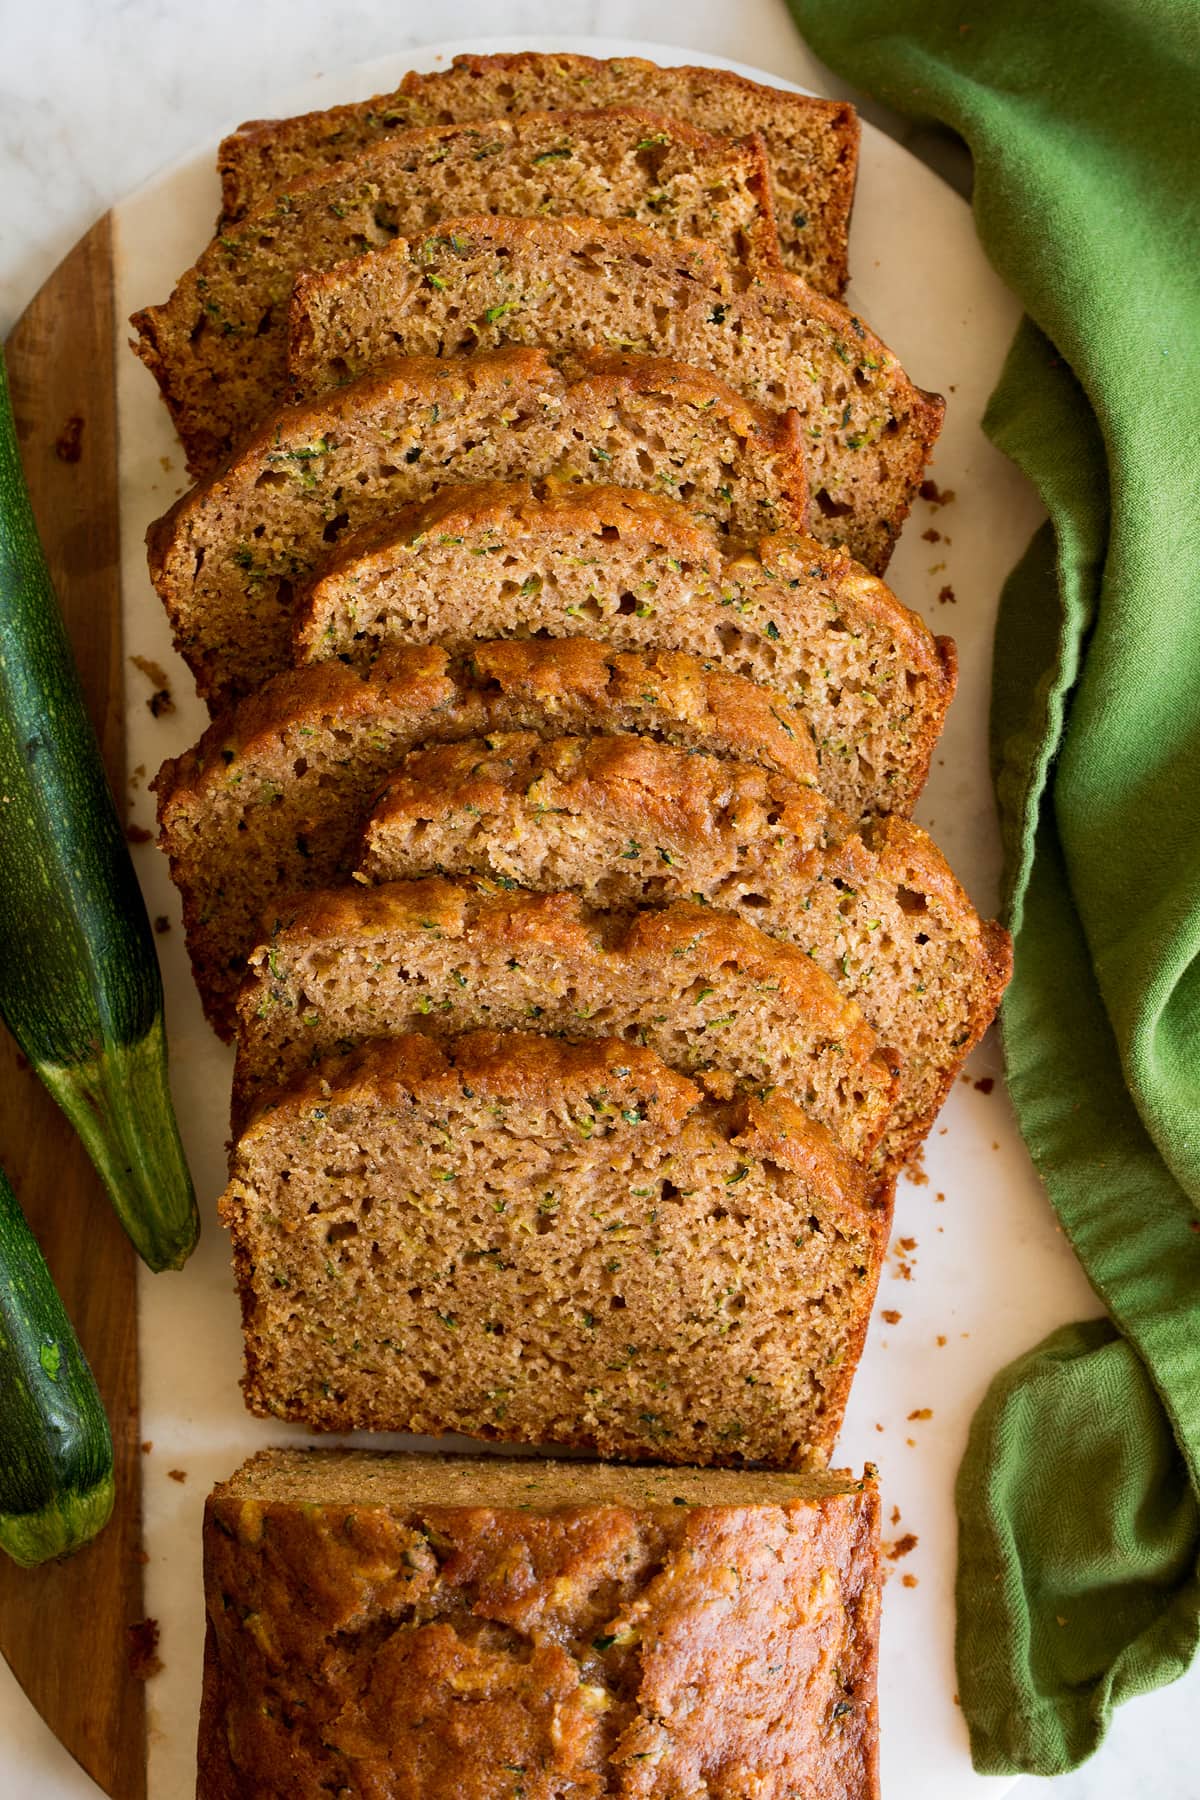 Sliced loaf of zucchini bread shown from above.